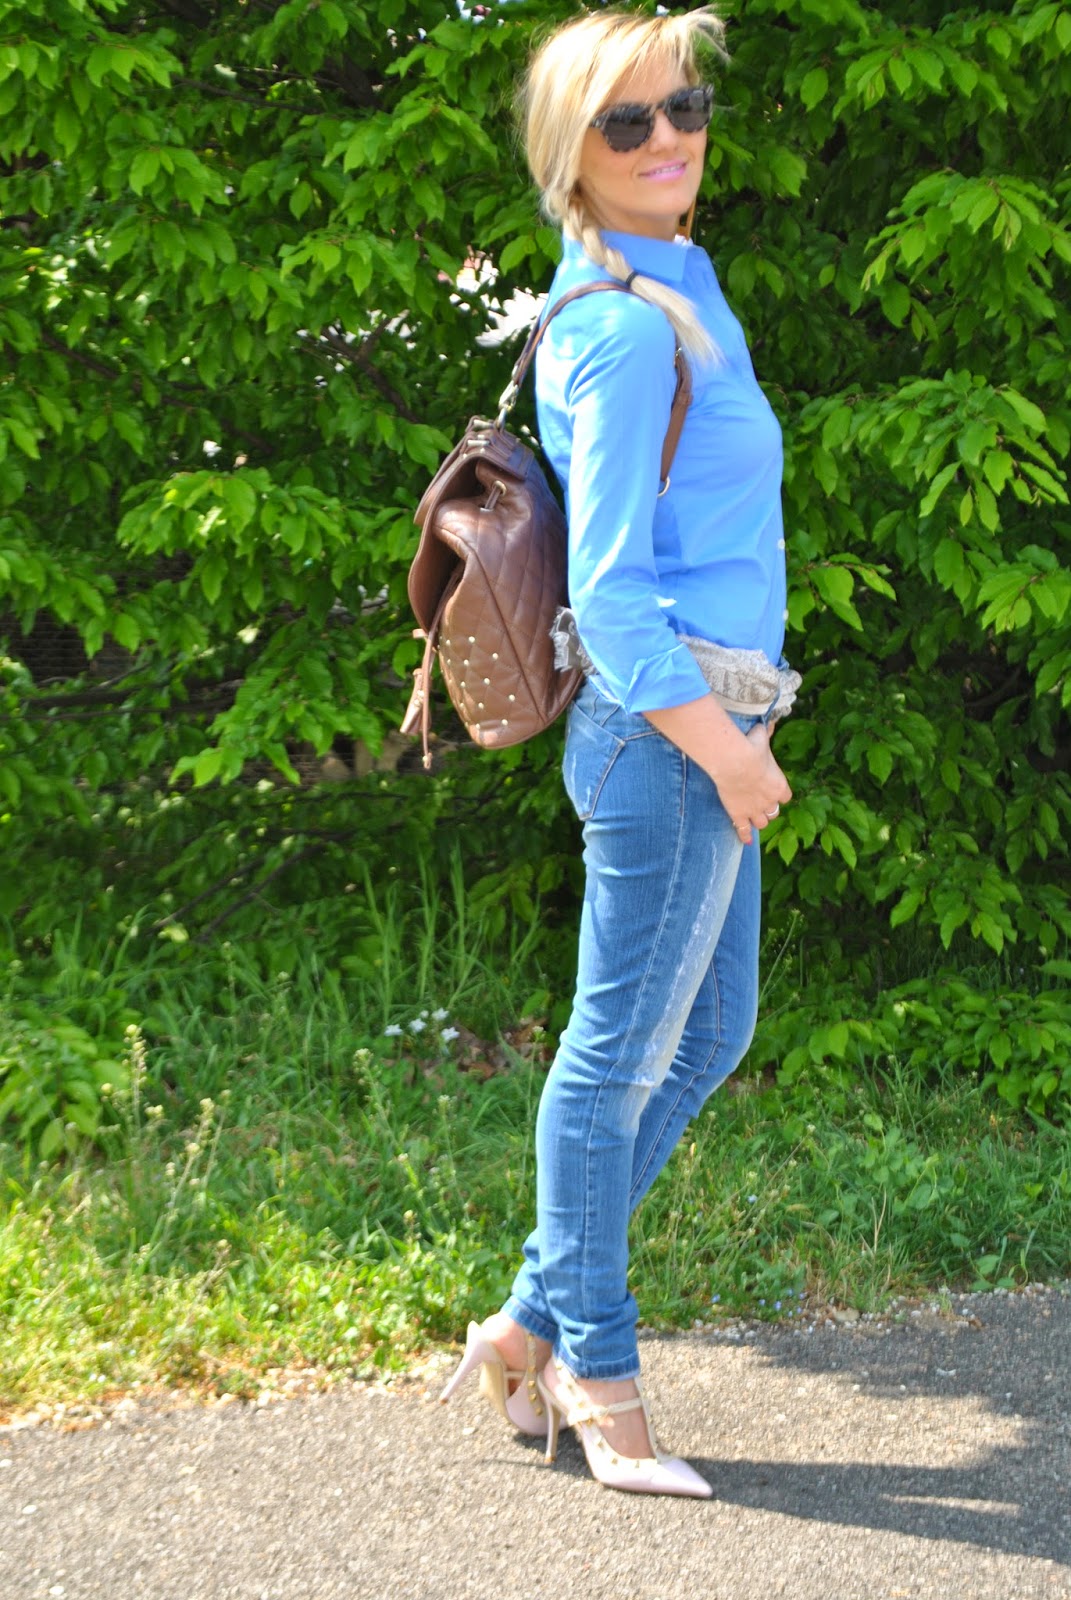 Color-Block By FelyM.: OUTFIT: JEANS, BLUE SHIRT AND BACKPACK